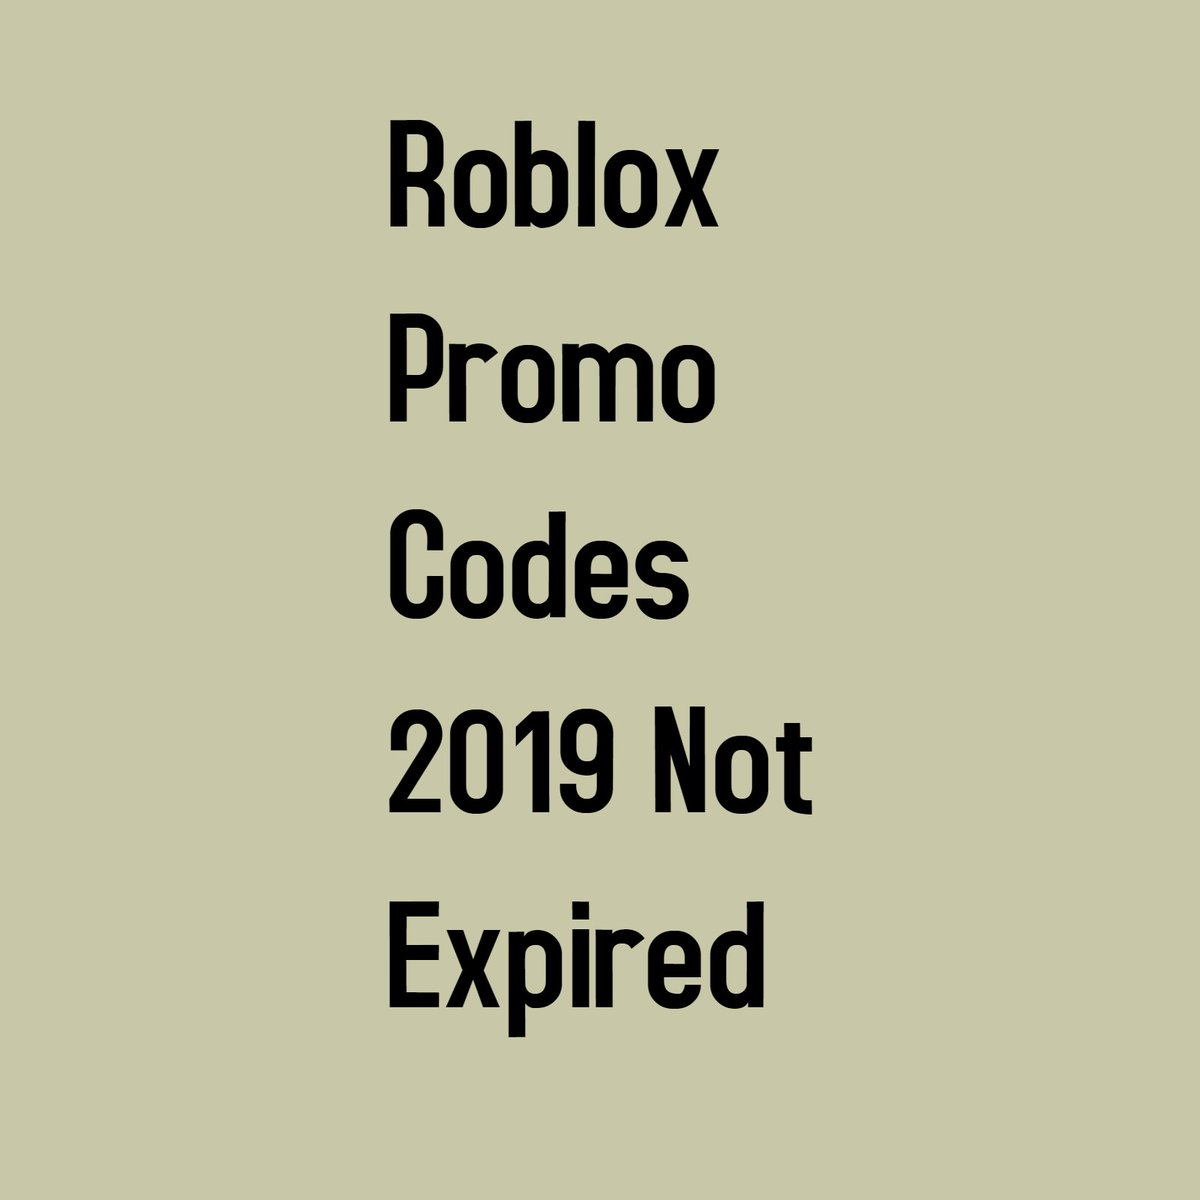 Robloxpromocodes2019notexpired Hashtag On Twitter - roblox promo codes 2019 not expired list for robux in 2019